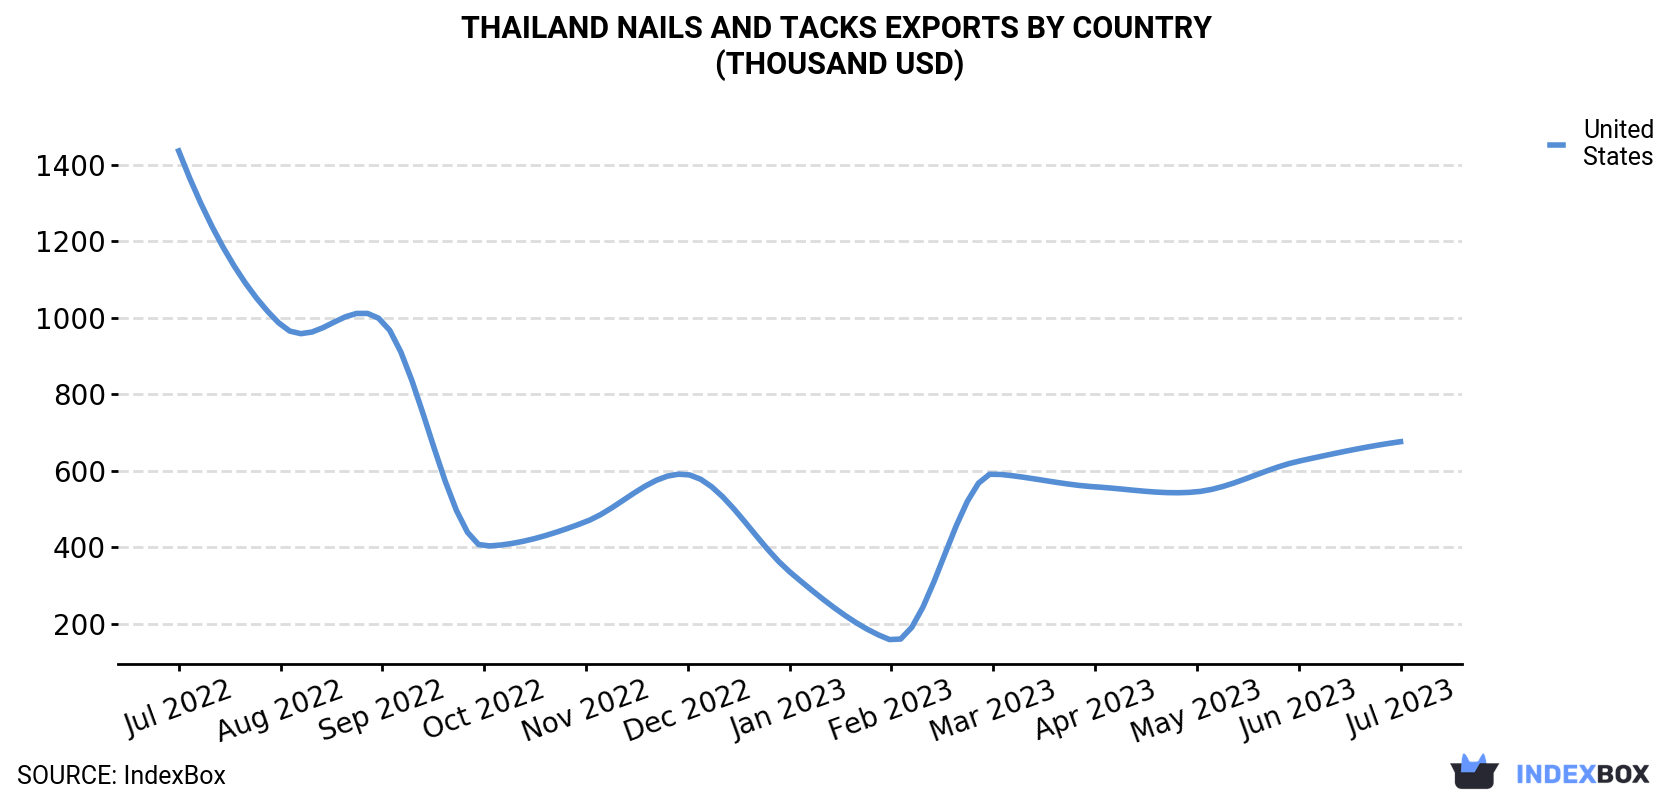 Thailand Nails And Tacks Exports By Country (Thousand USD)